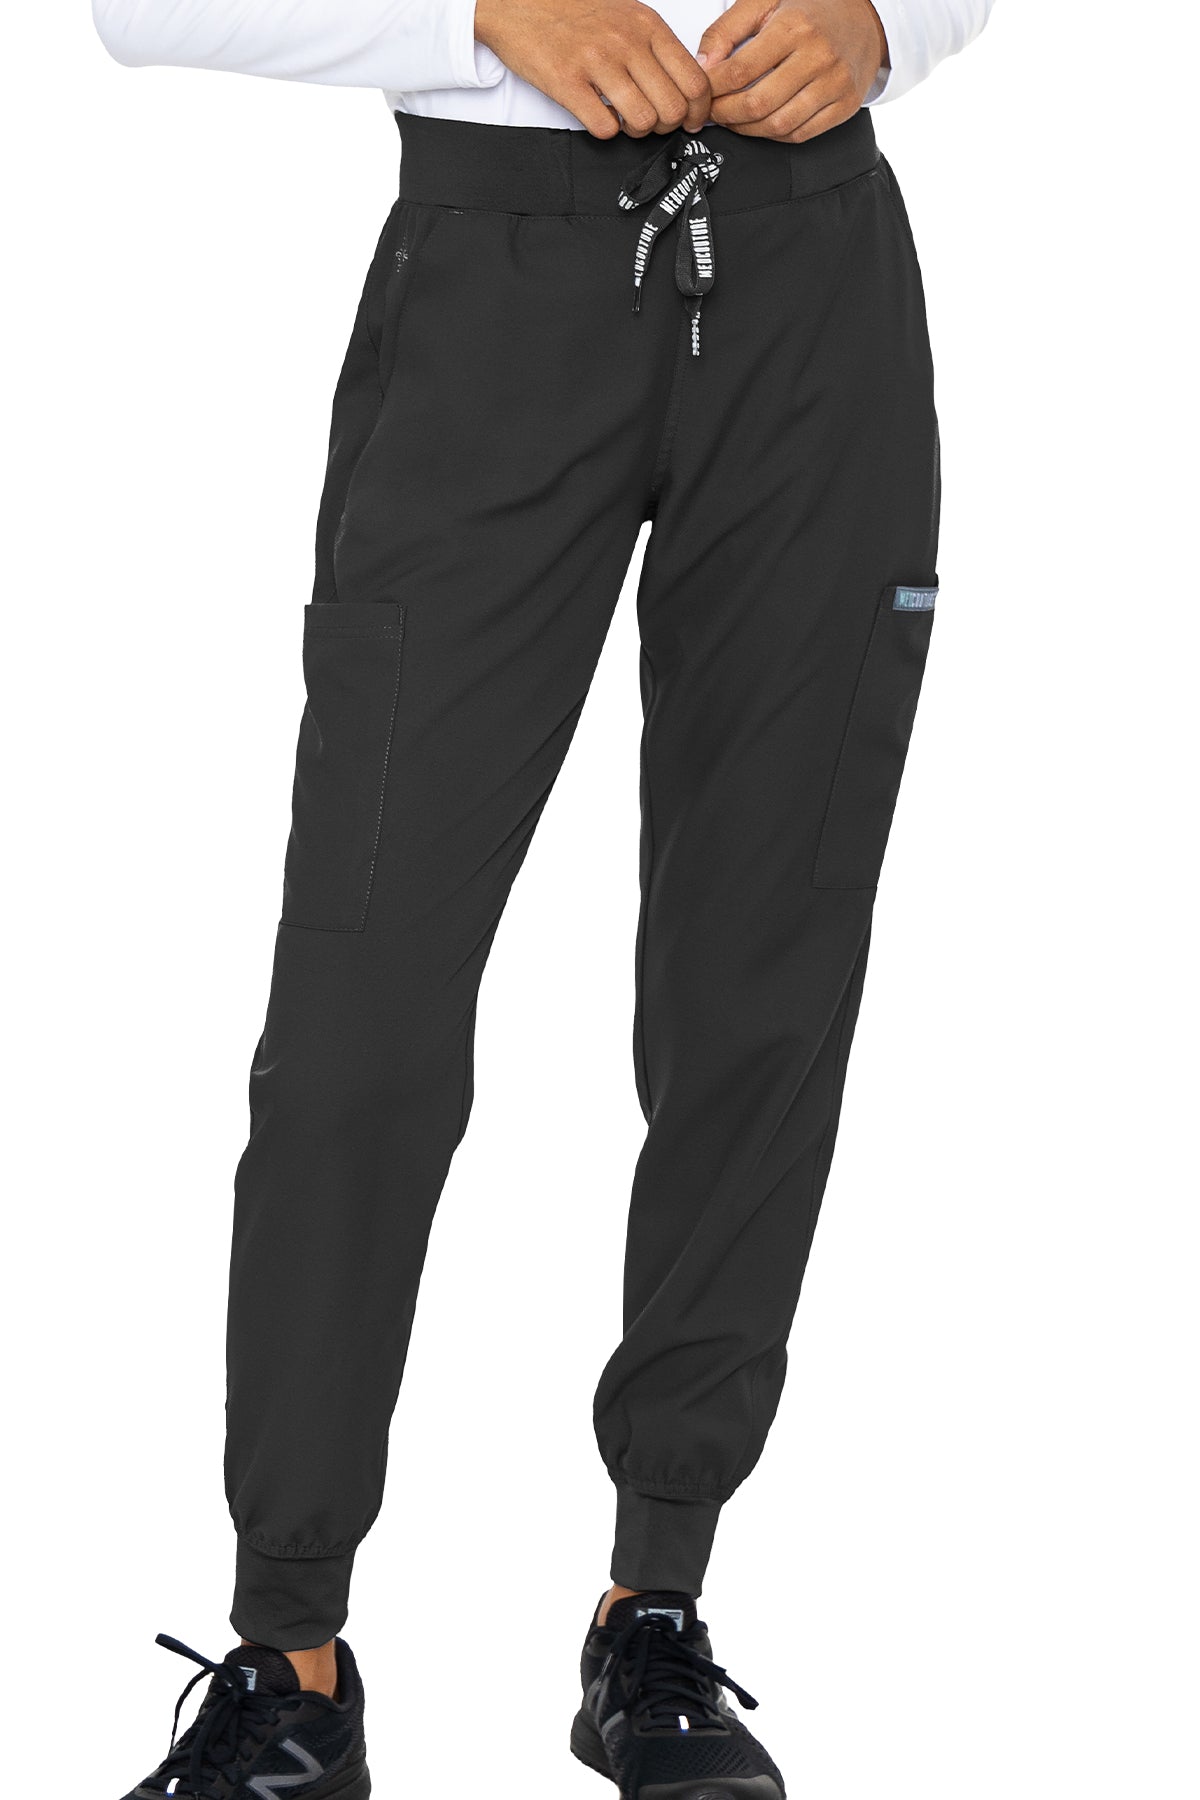 Med Couture Scrub Pants Insight Jogger Pant in Black at Parker's Clothing and Shoes.